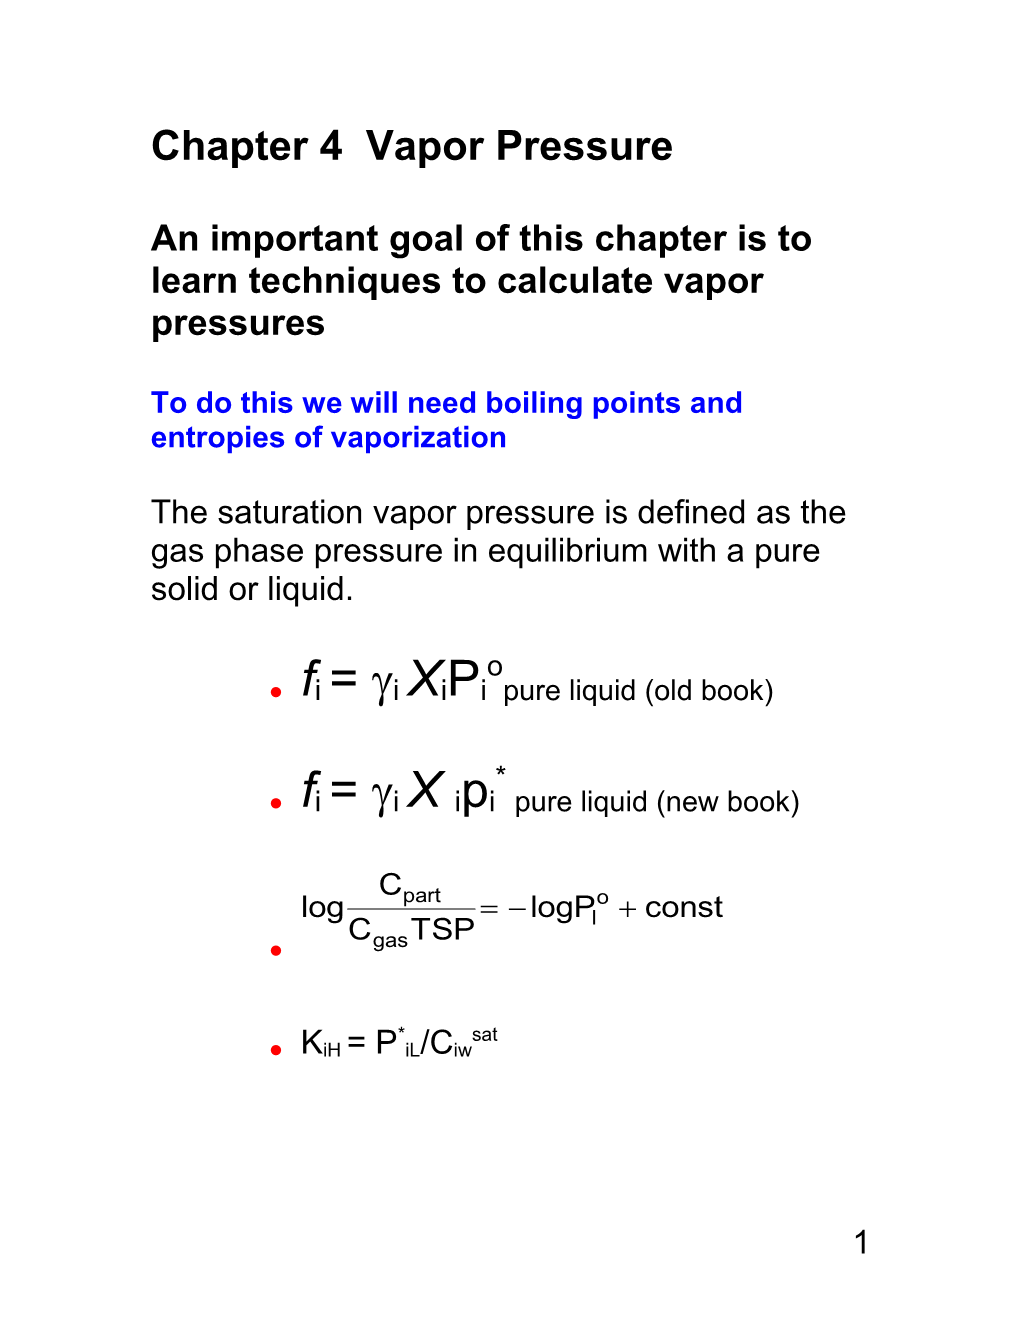 An Important Goal of This Chapter Is to Learn Techniques to Calculate Vapor Pressures